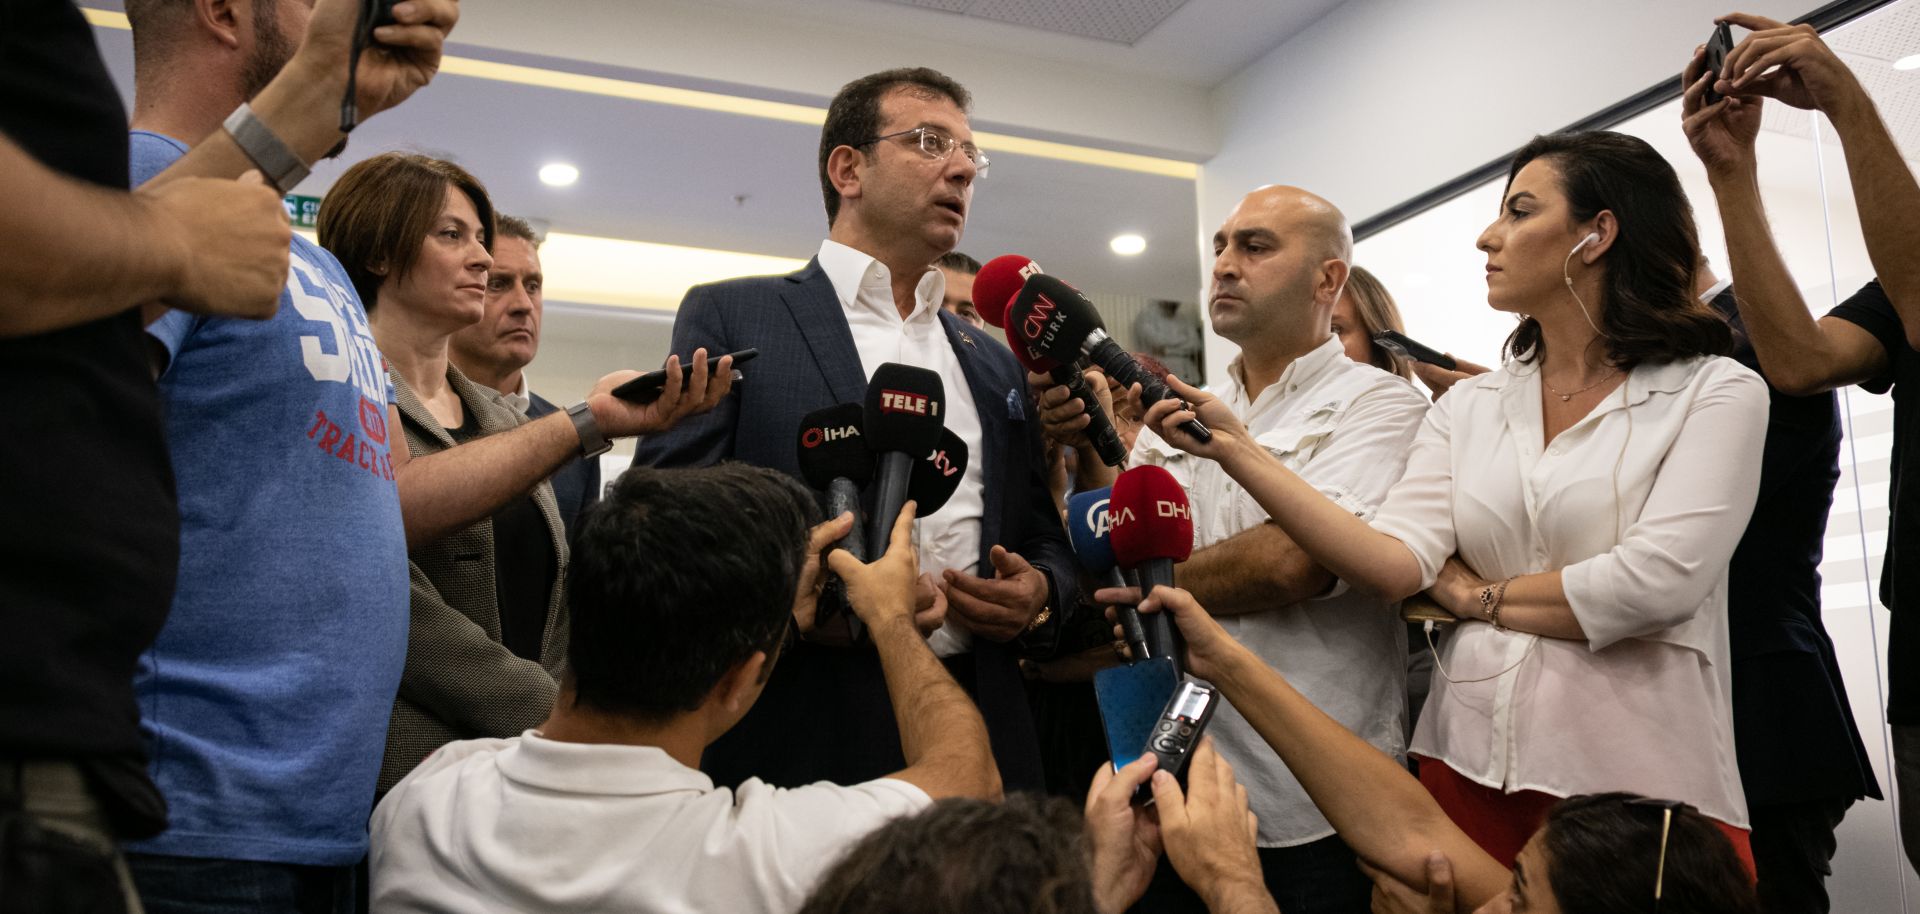 Istanbul Mayor Ekrem Imamoglu speaks to reporters in Istanbul on Sept. 2, 2019, denying accusations from President Recep Tayyip Erdogan that he is linked with terrorists because he visited Diyarbakir following the removal of three Kurdish mayors in Southeast Anatolia.